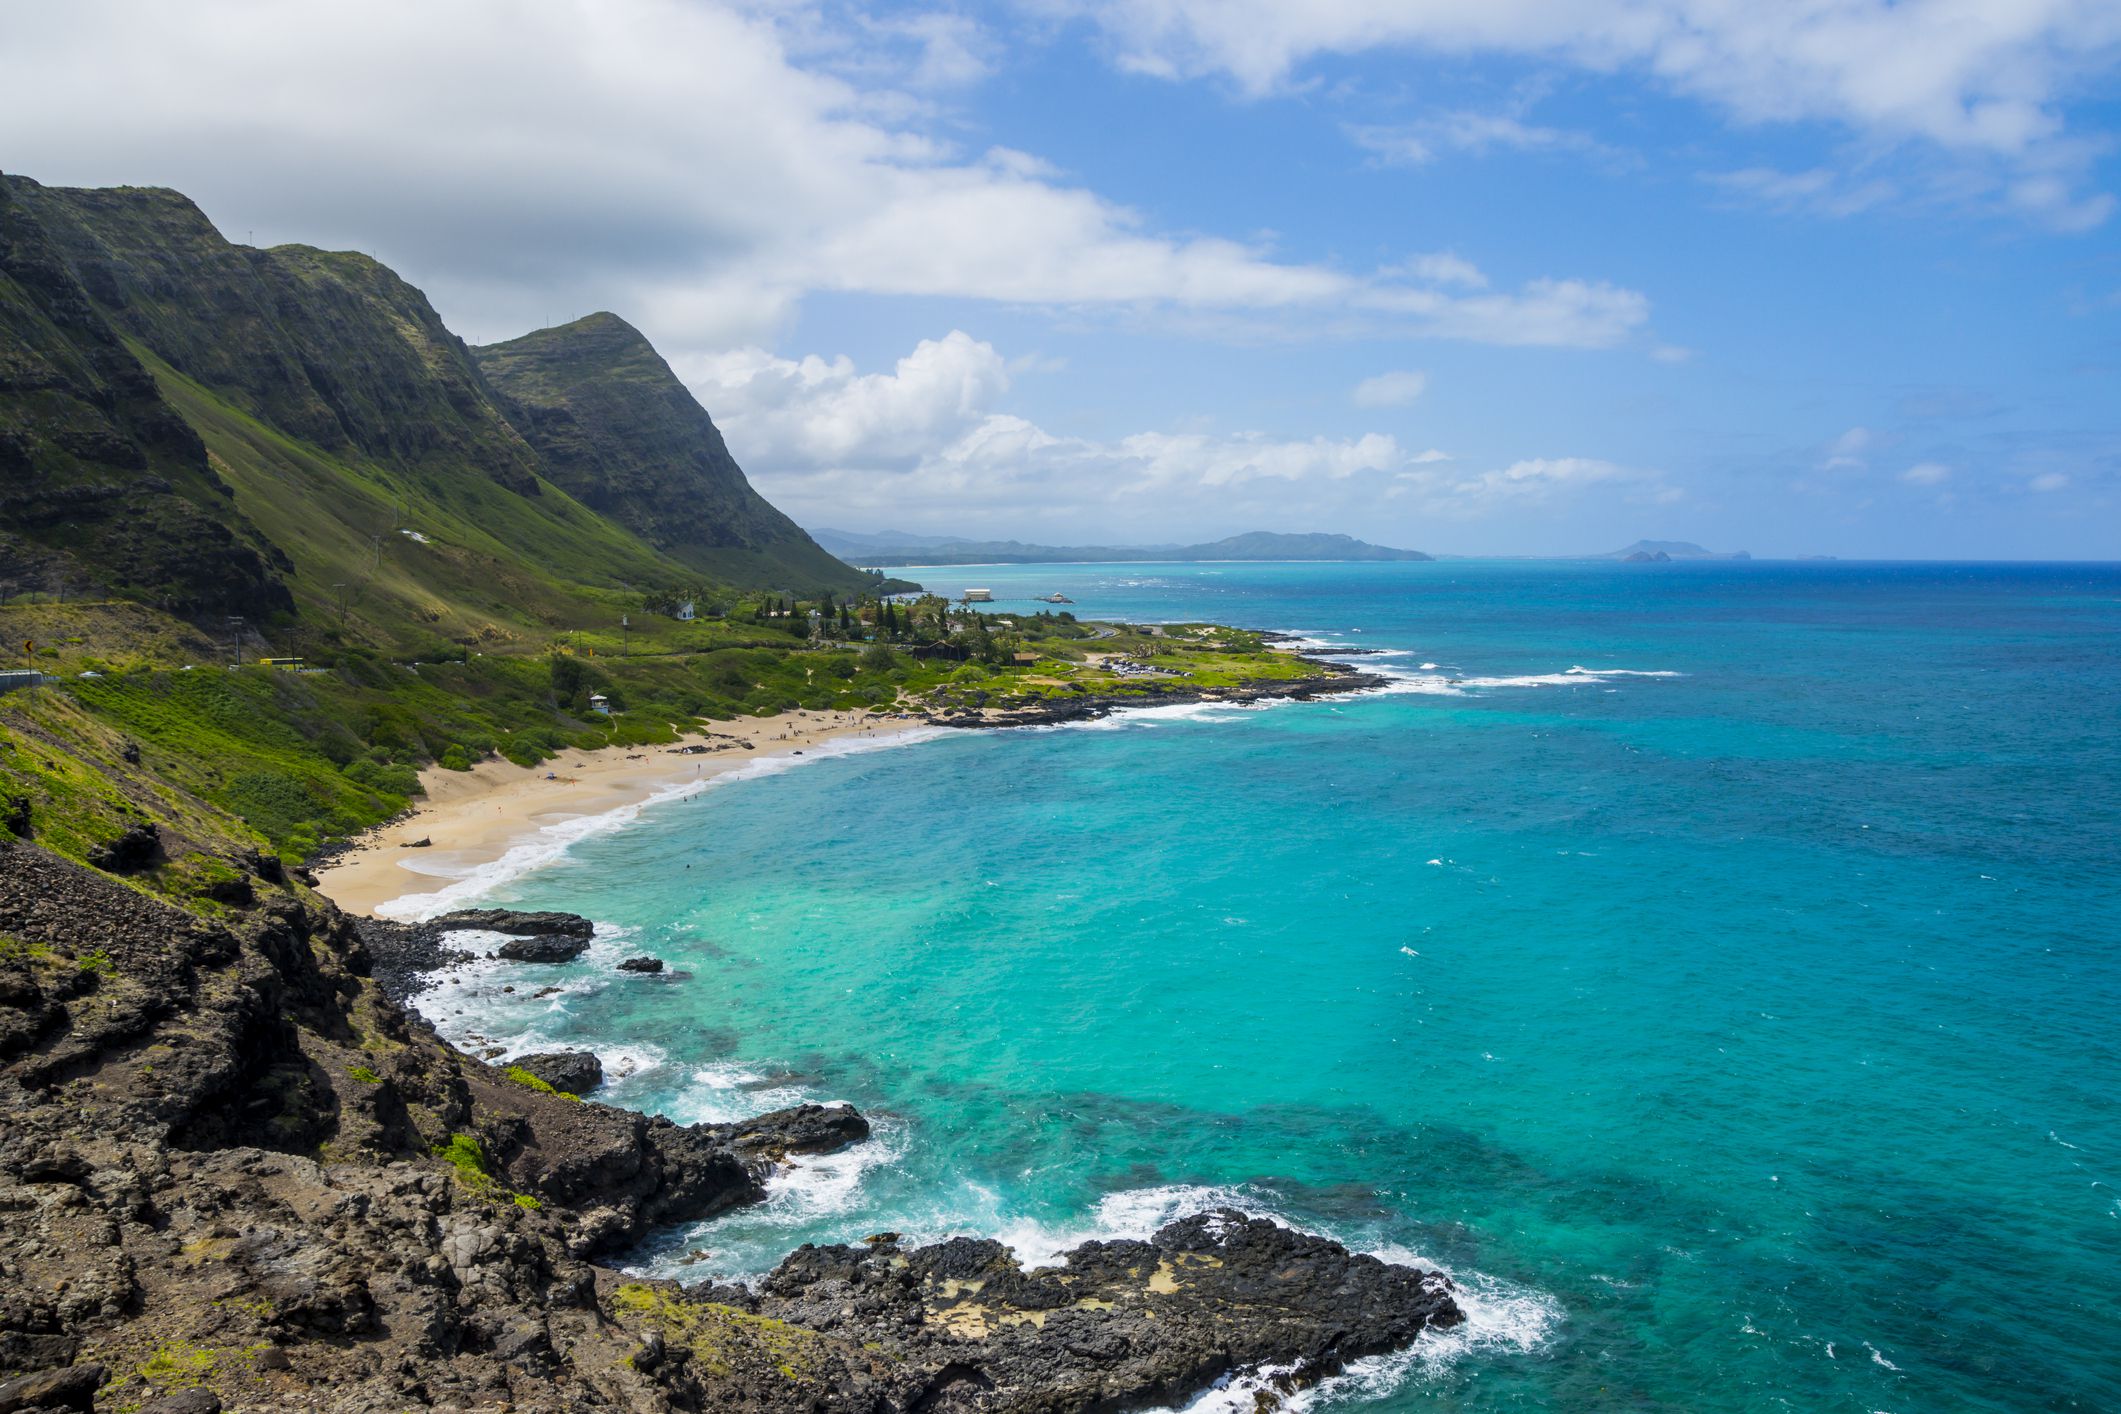 <p>The cost of living in Hawaii averages 46% higher than the rest of the U.S. A typical home costs $830,193, more than double the average U.S. home value of $346,653.</p><p class="u-margin-bottom">That said, Hawaii’s average state property tax is the lowest in the nation, just 0.27%, though high housing prices make the median annual tax payment much higher than in other parts of the U.S. If you’re considering a move to Hawaii, plan carefully with your budget in mind.</p><p class="u-margin-bottom">Affordability can vary dramatically across Hawaii’s islands, so it may be worth considering cities large and small across the island chain.</p>